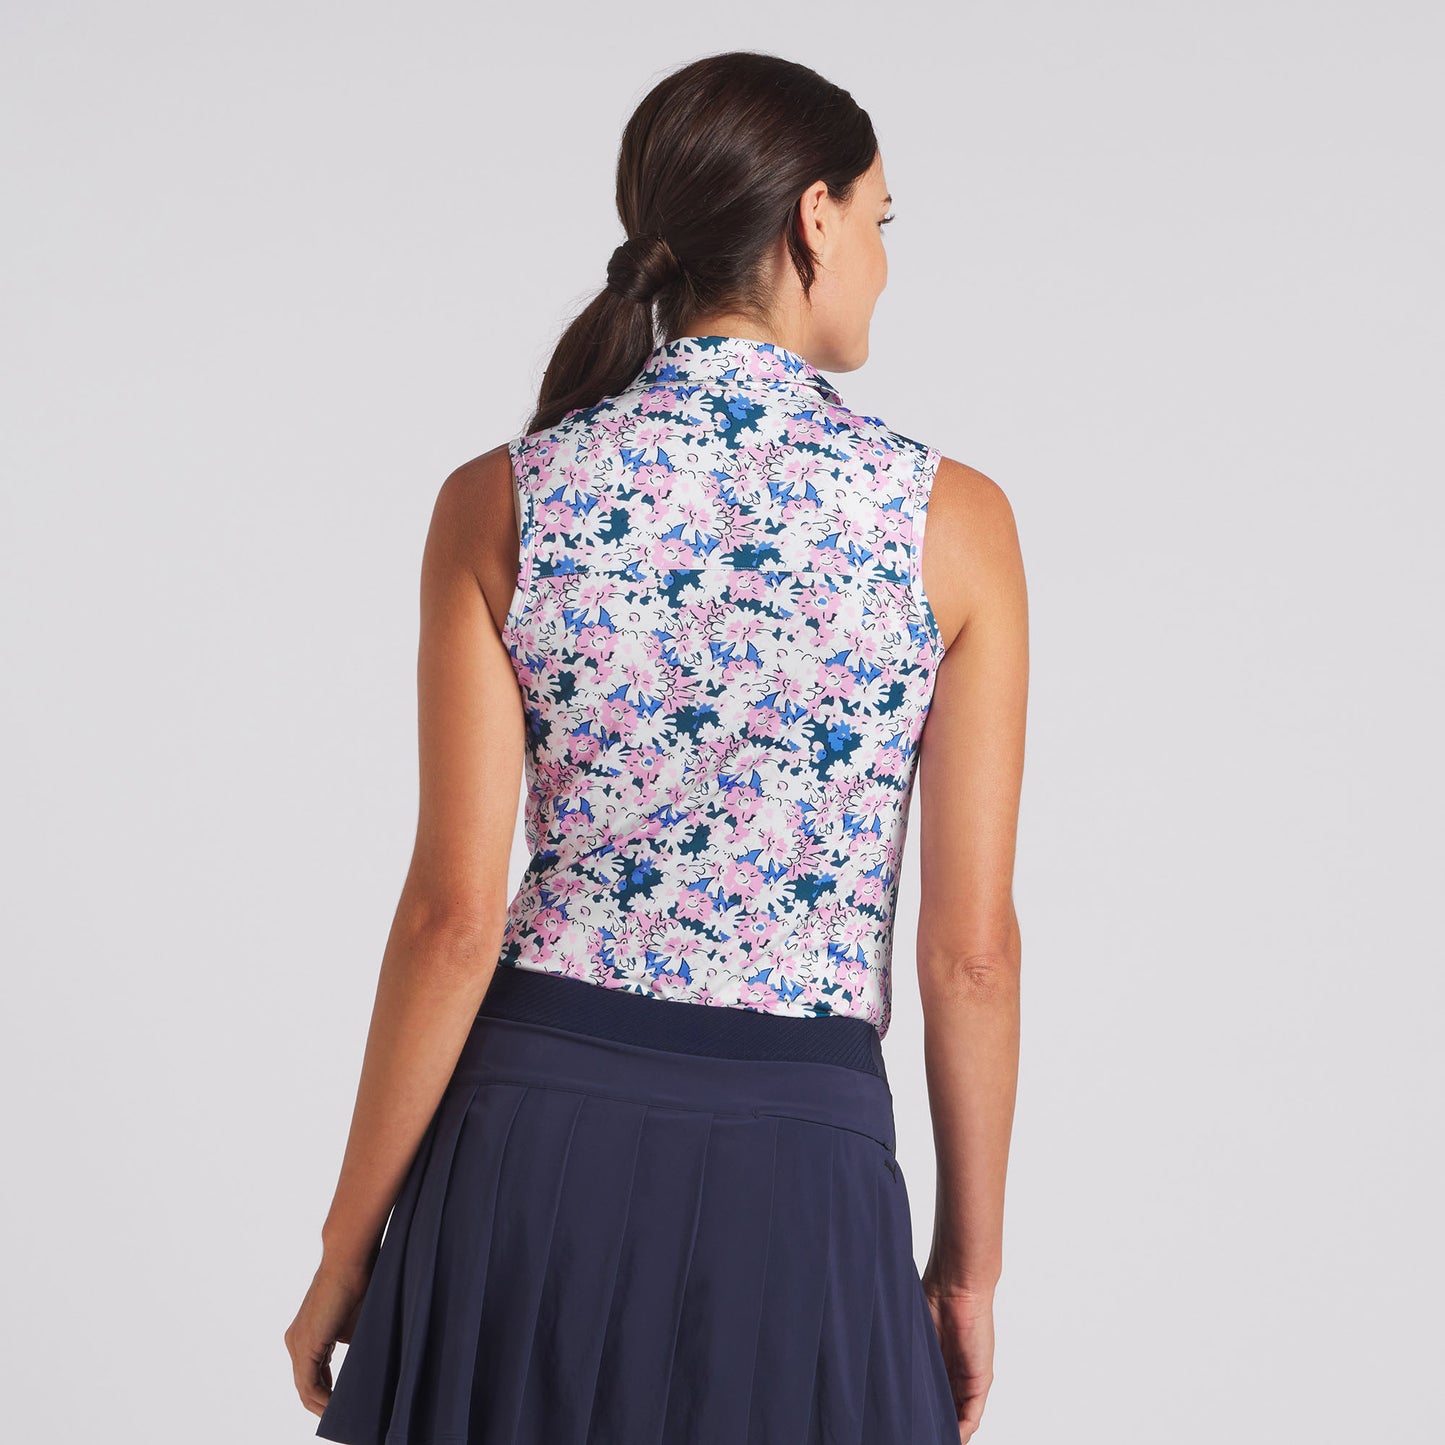 Puma Ladies Sleeveless Polo in Pink Icing-White Glow Bloom Print